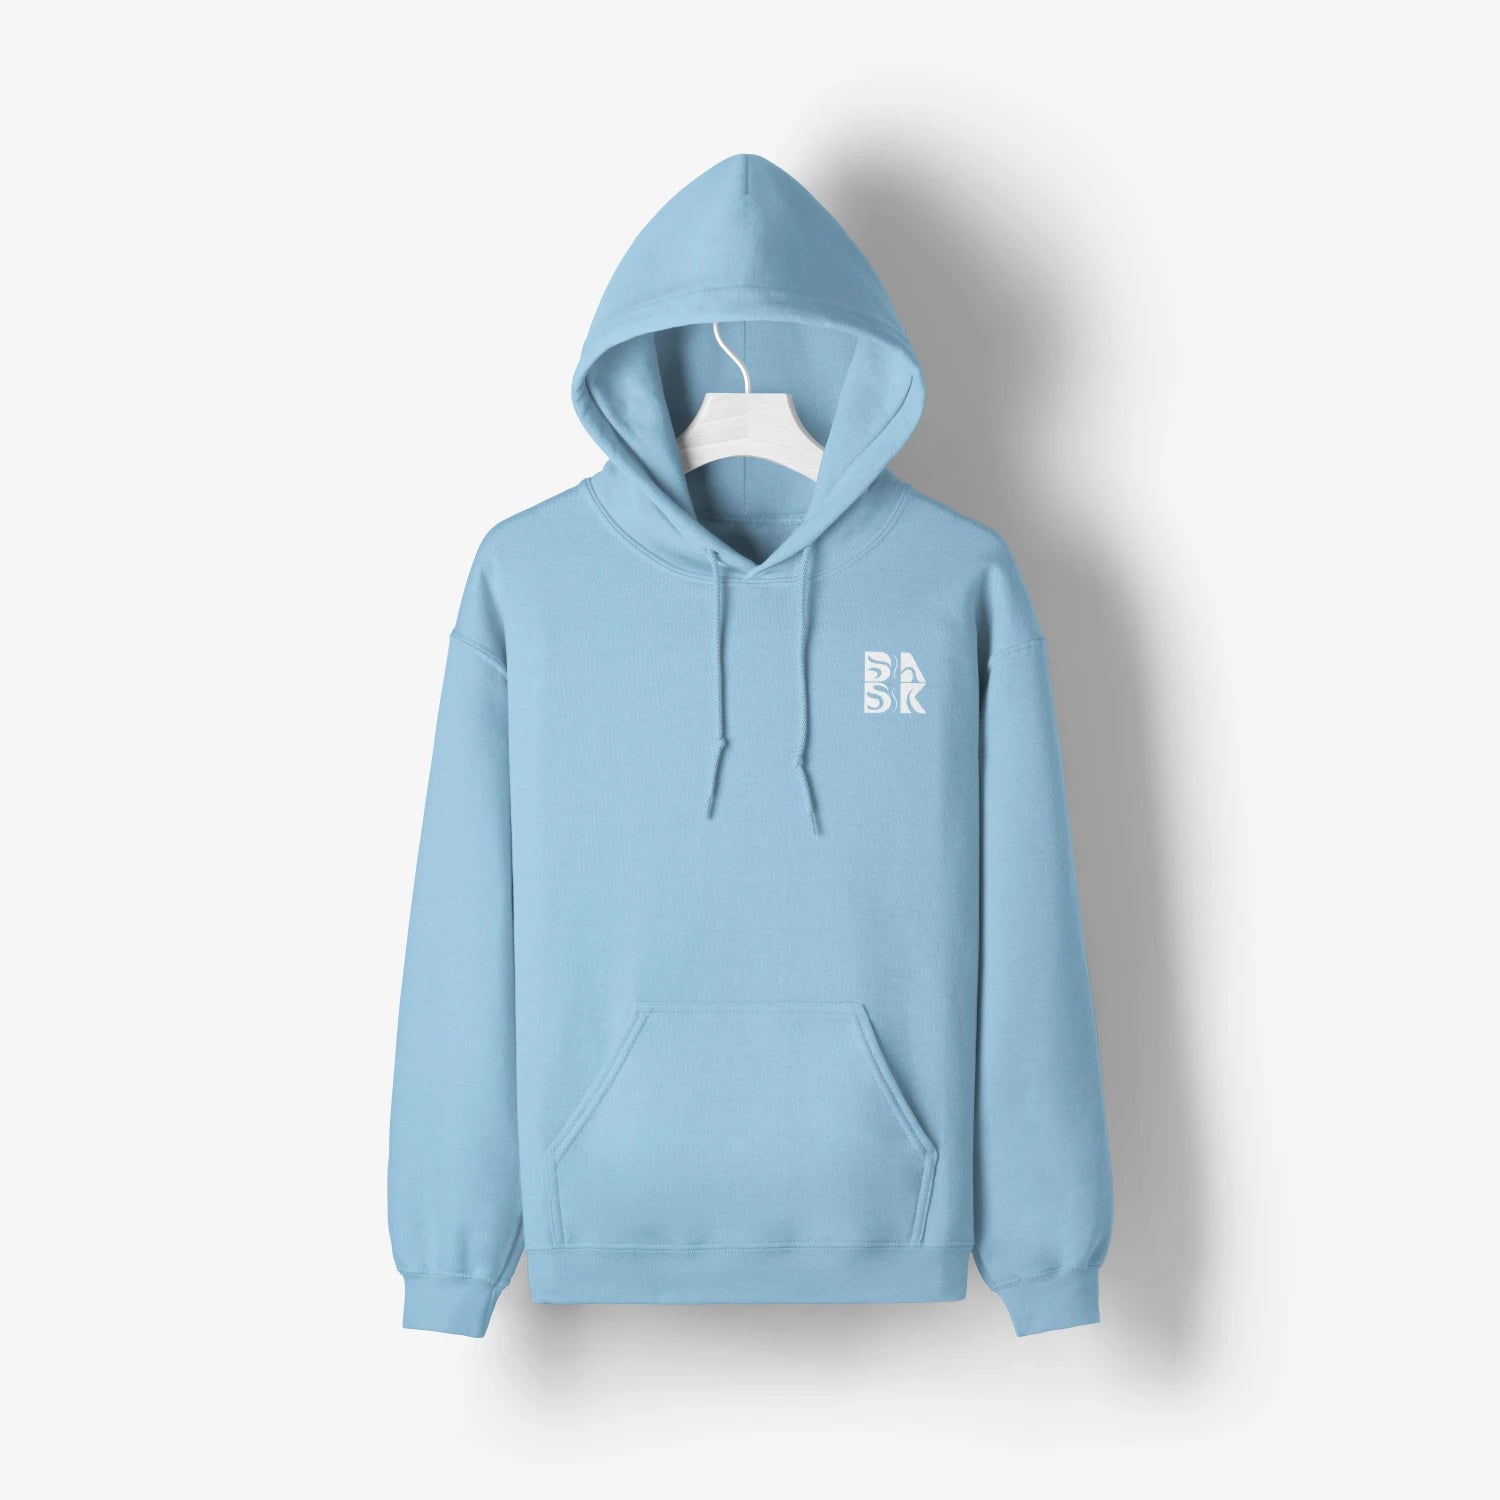 A light blue Water Walking Faith Hoodie with the letter b on it, perfect for Be Still and Know Clothing enthusiasts.